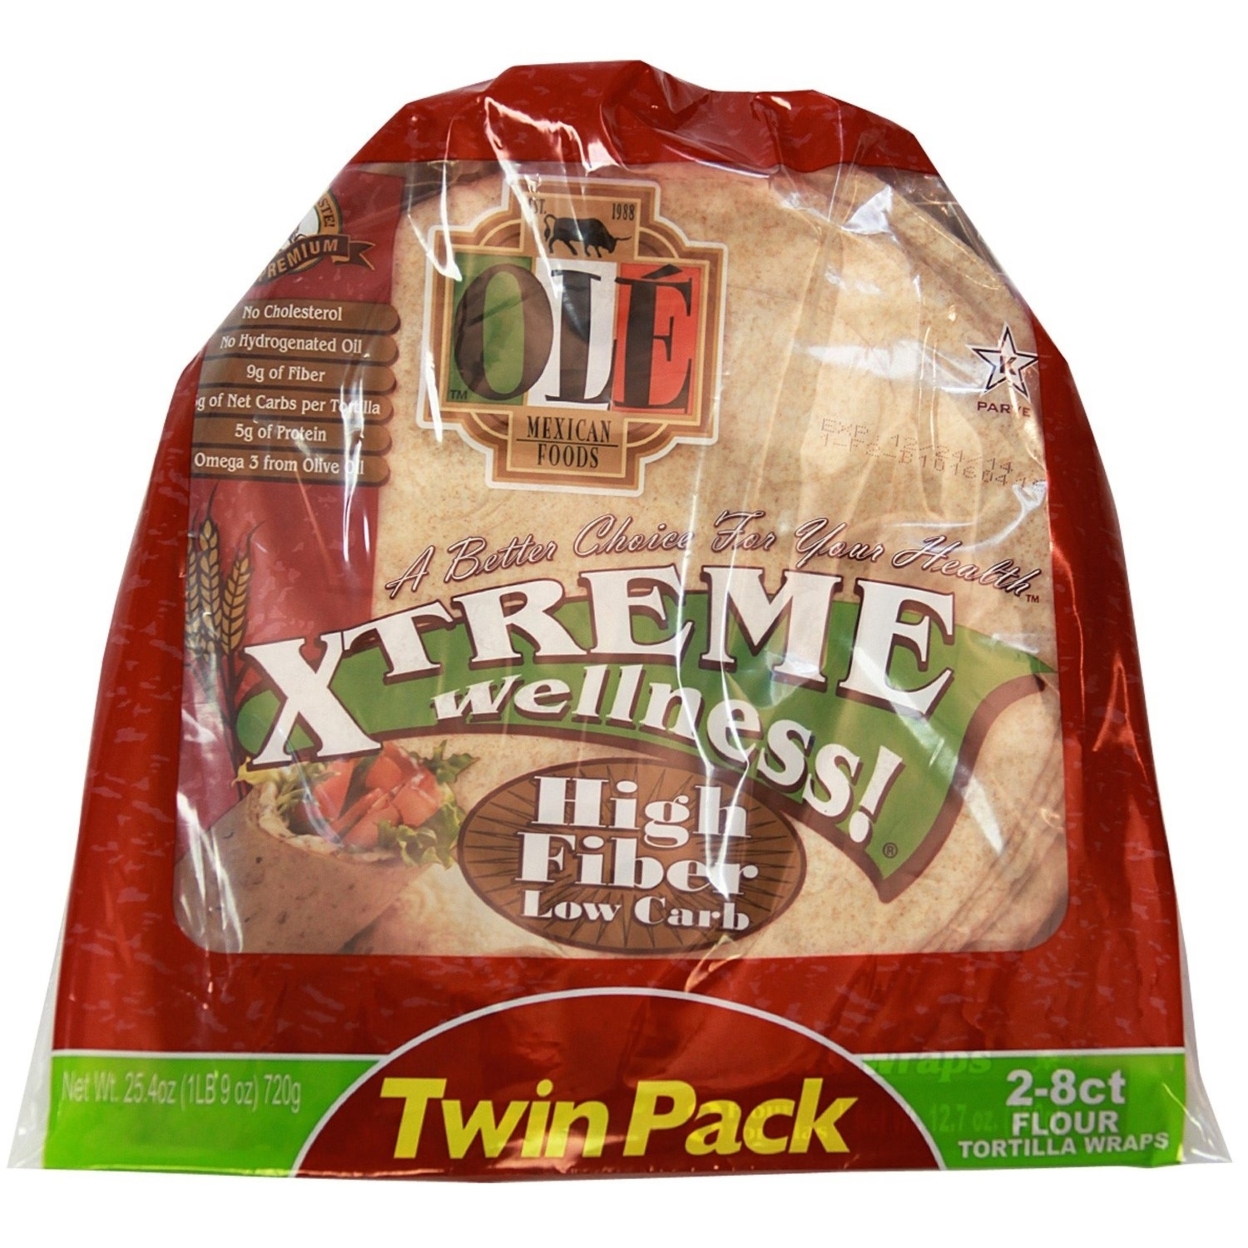 Ole Xtreme Wellness High Fiber Low Carb Tortilla Wraps, Twin Pack (16 Count)